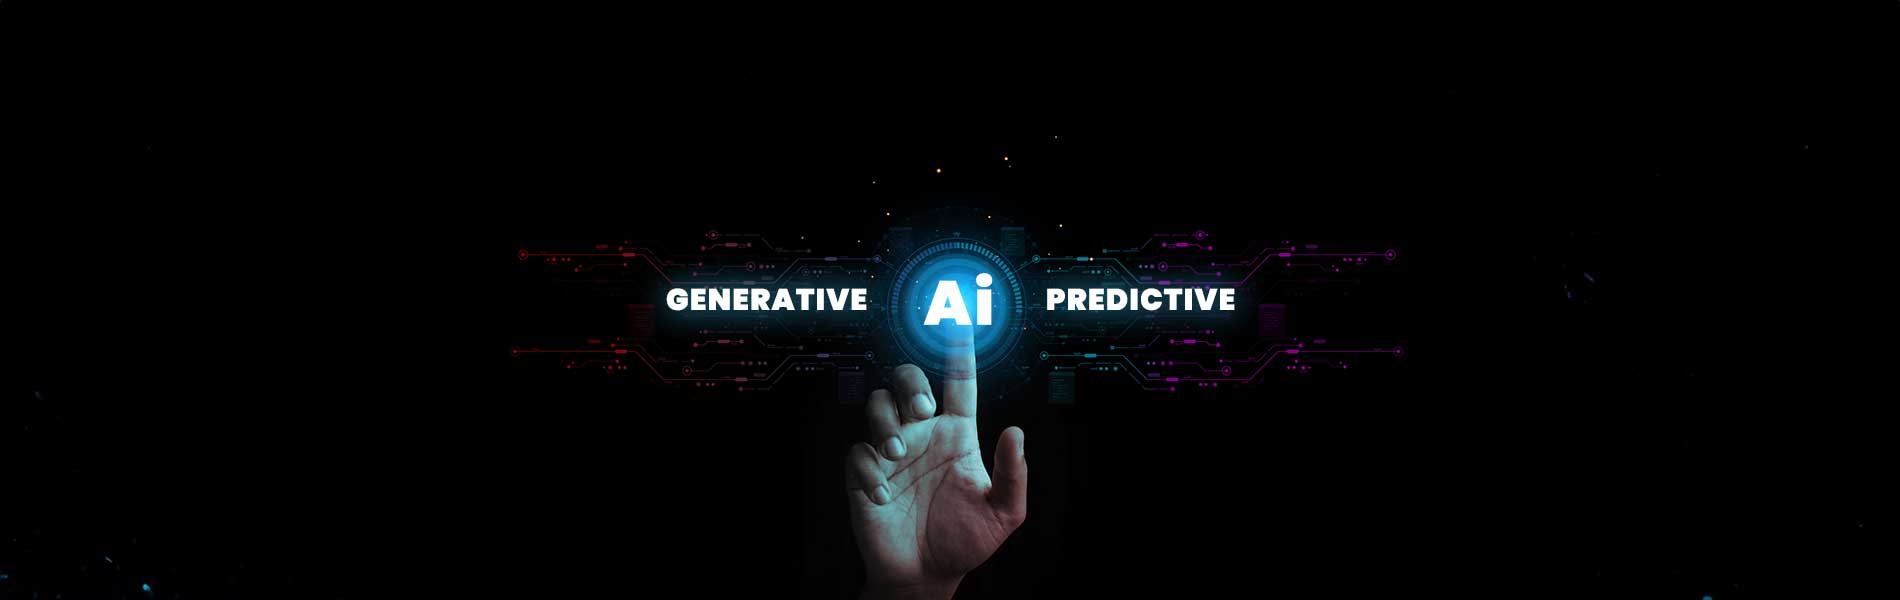 Generating-or-Predicting-The-Two-Faces-of-Artificial-Intelligence